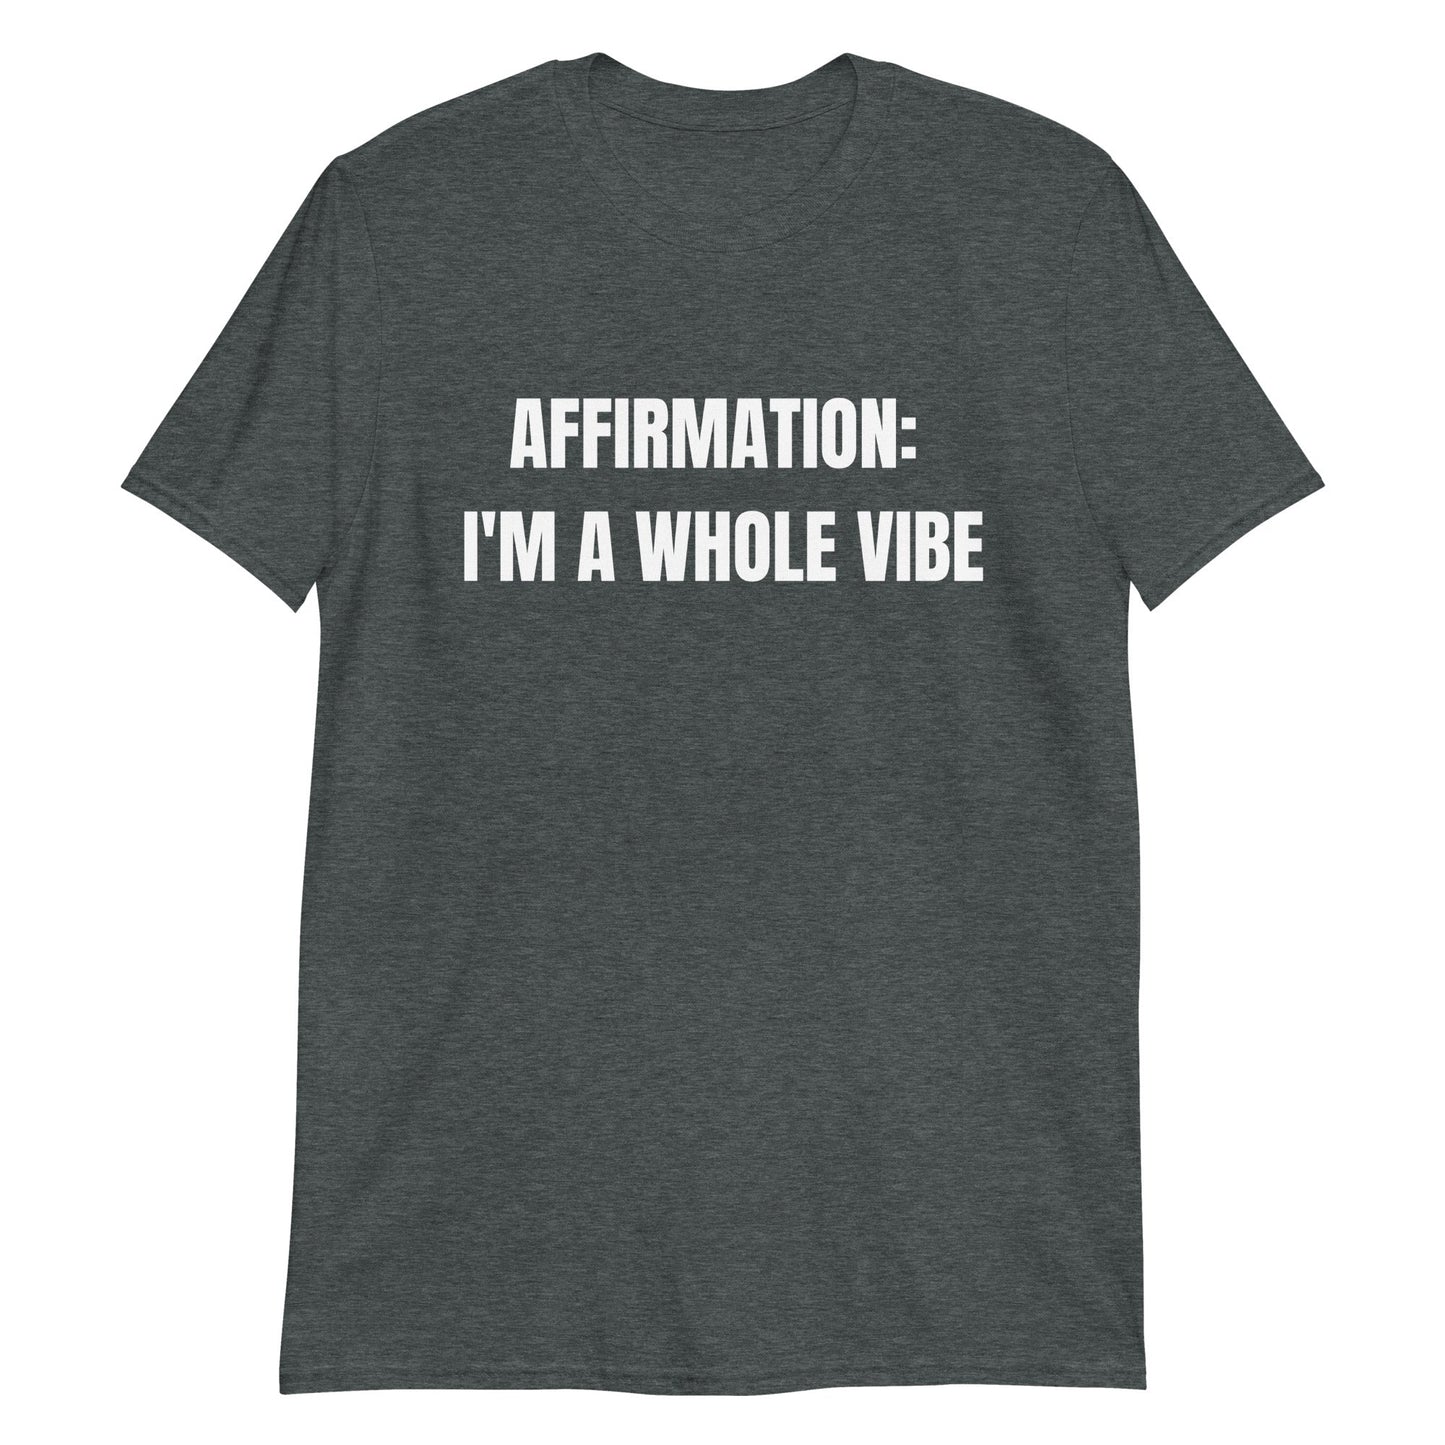 Affirmation: I'm a Whole Vibe Short-Sleeve Unisex T-Shirt (Refer to size chart - for a slim fir order a size down) - Catch This Tea Shirts